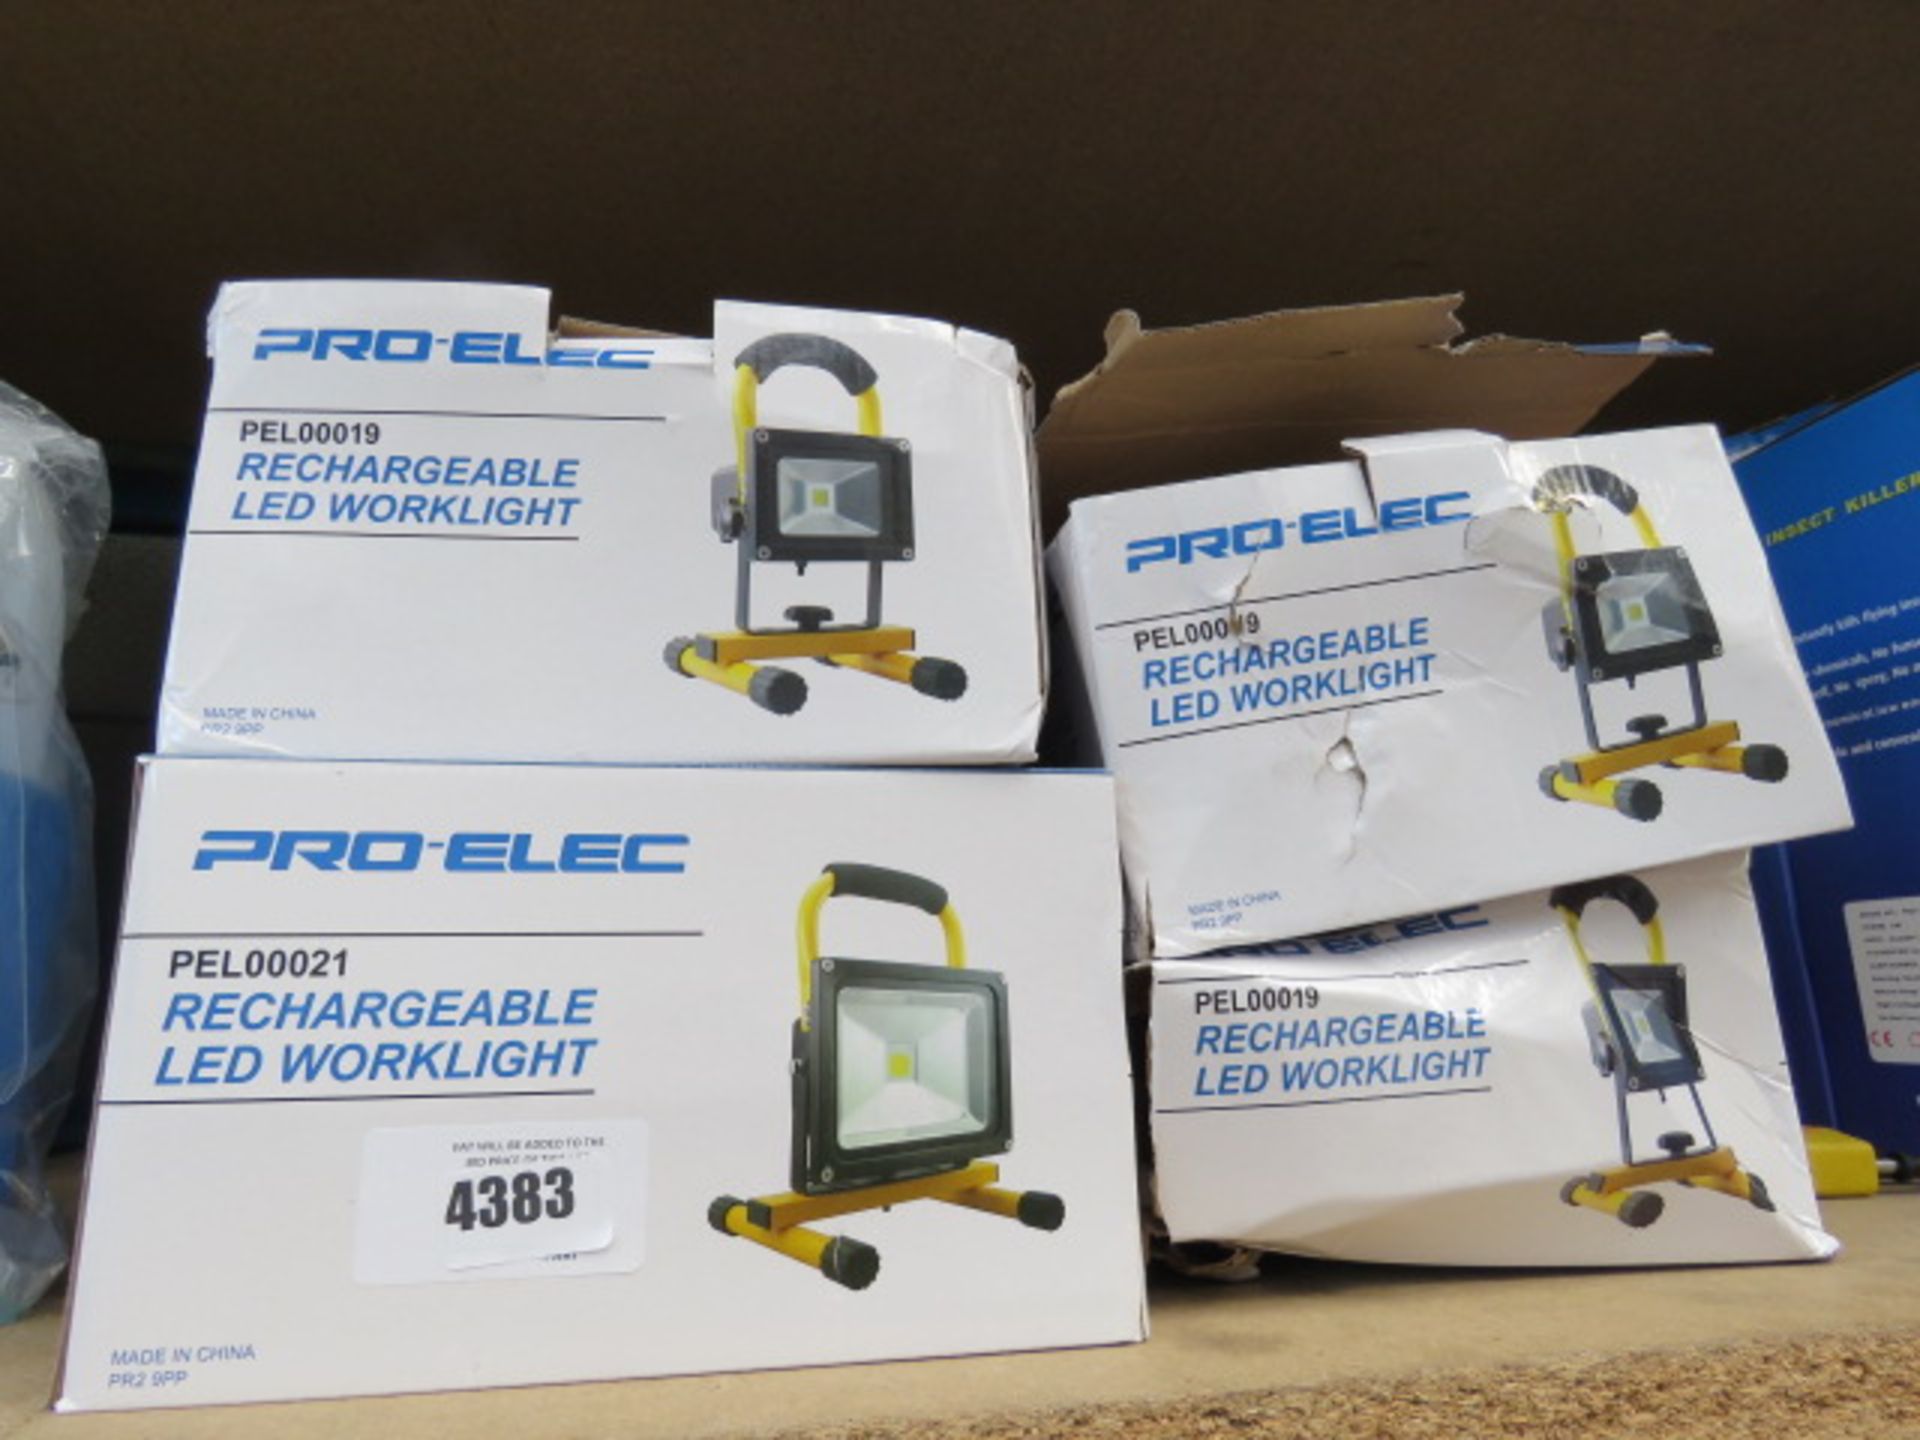 4 rechargeable LED worklights